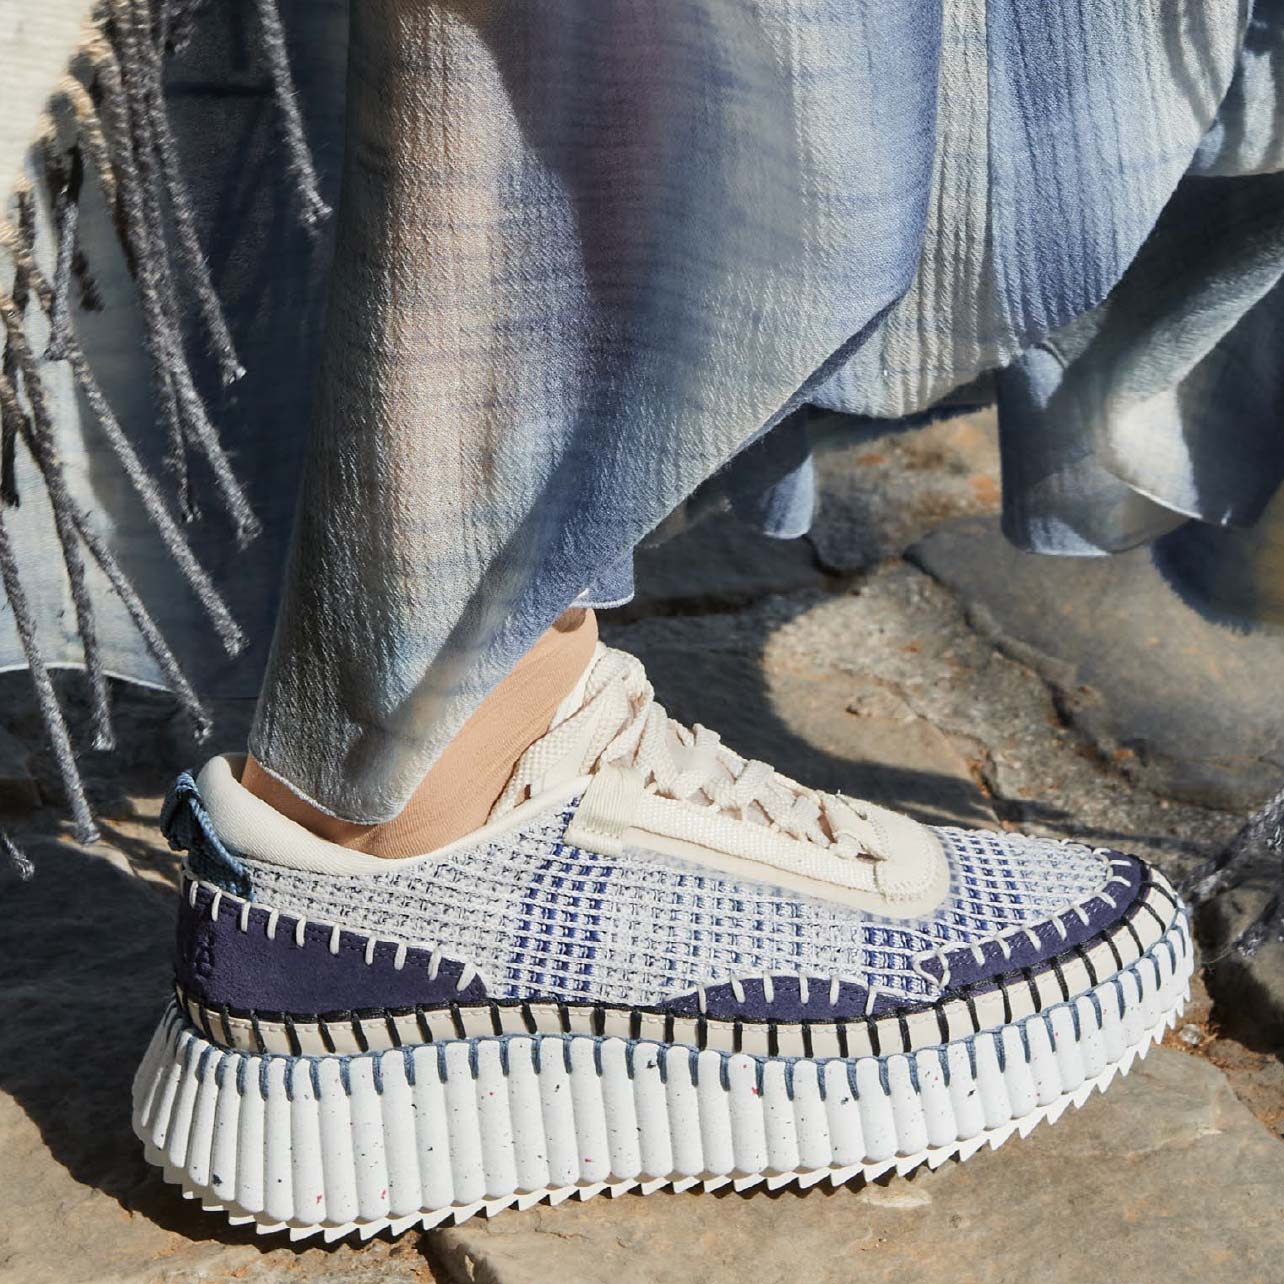 Womens sneakers with blue, white and tan woven pattern